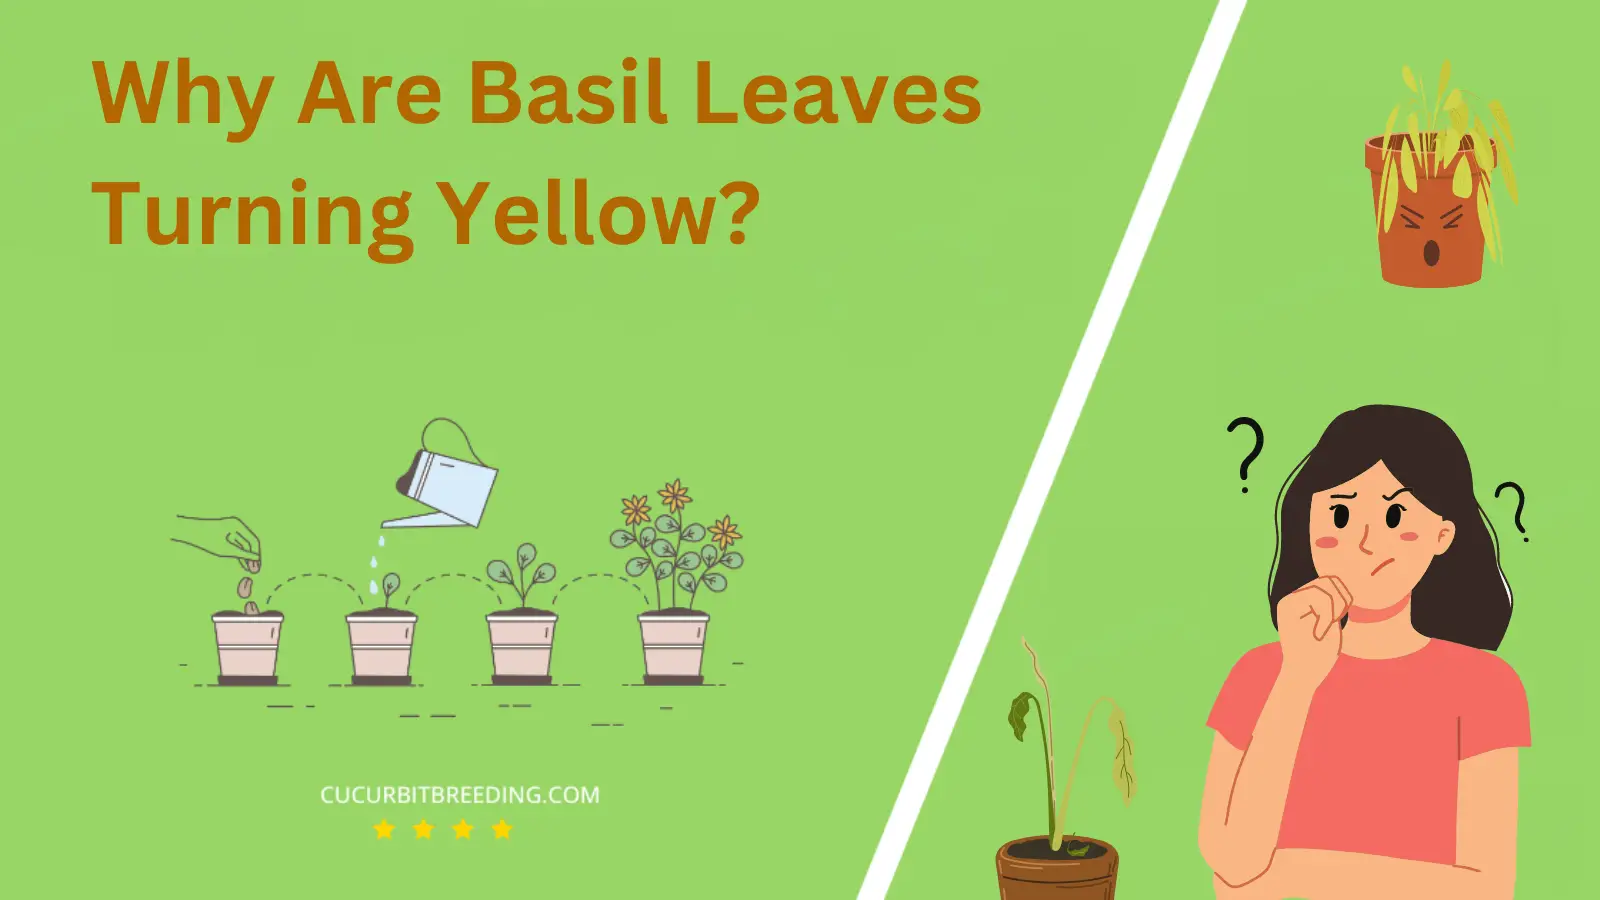 Why Are Basil Leaves Turning Yellow